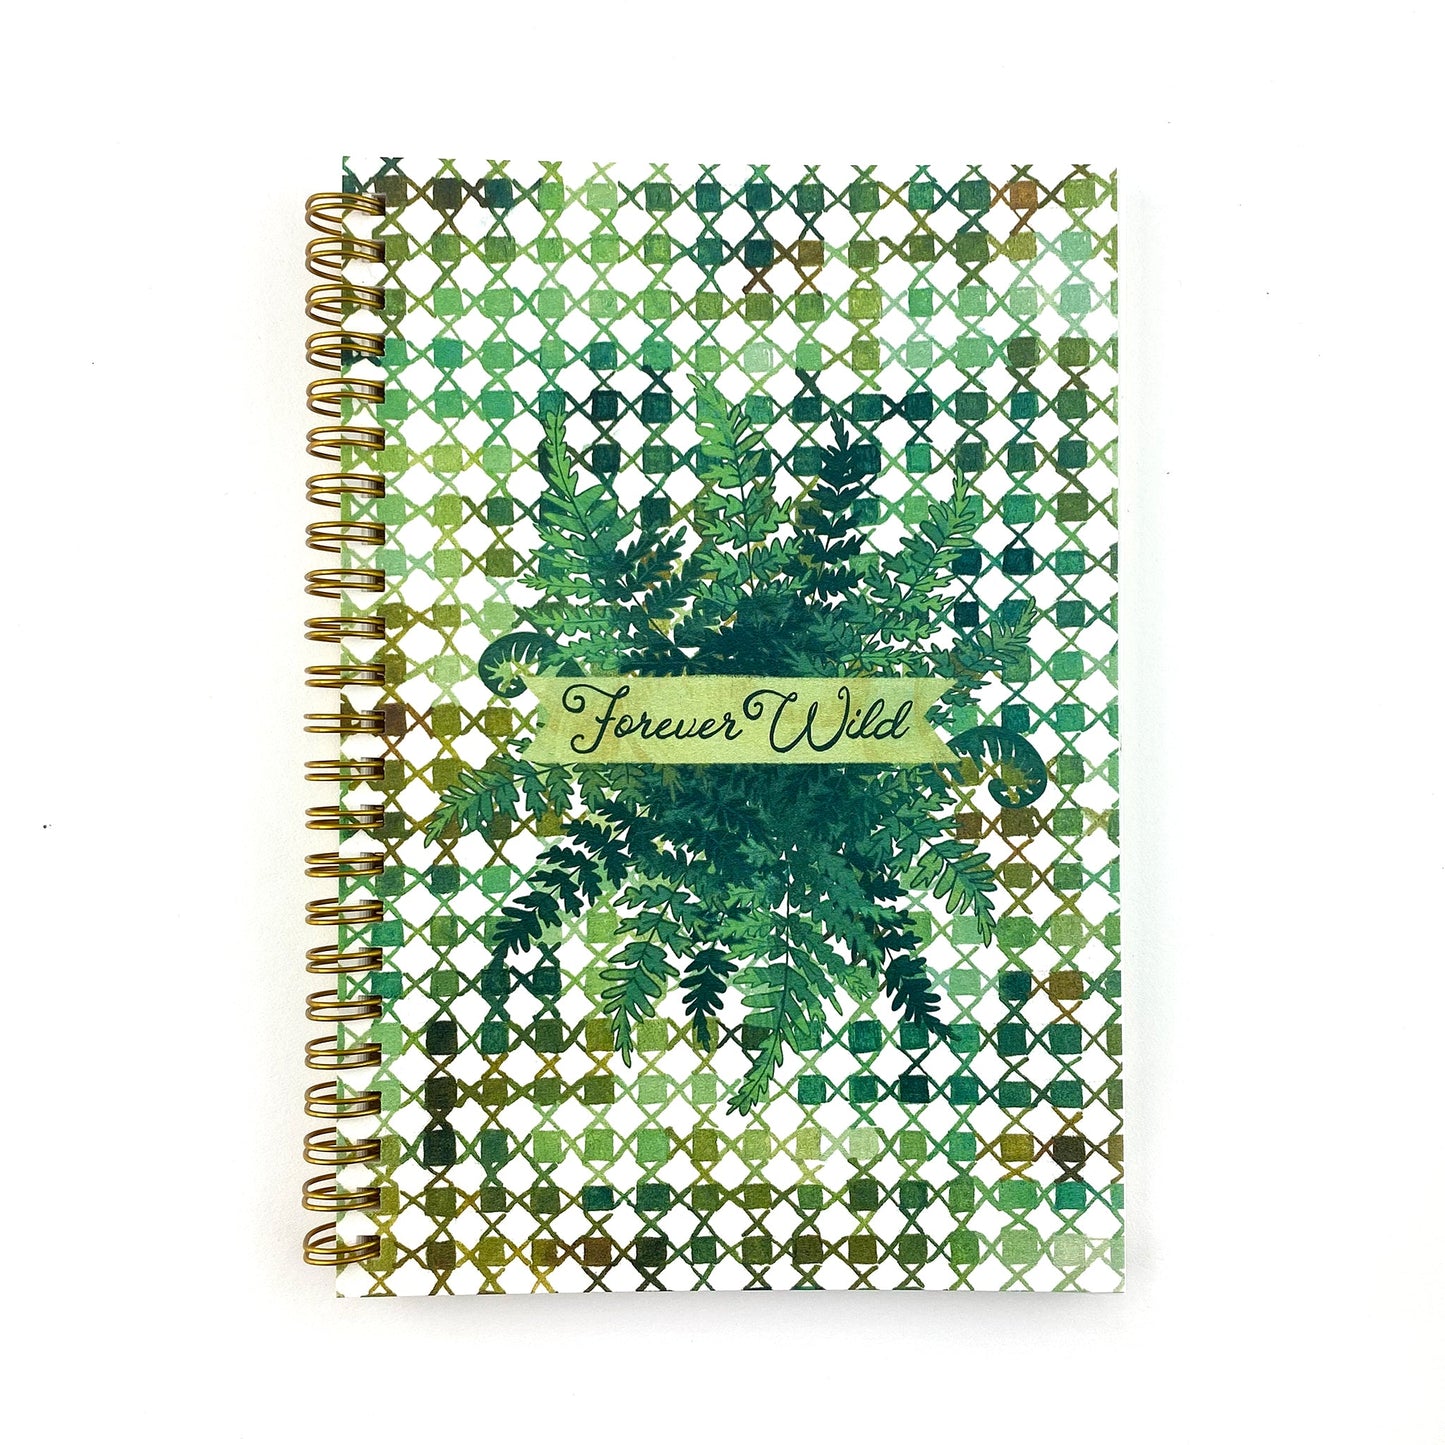 Spiral Bound notebook with a handpainted checkered cover , a grouping of ferns in the center with a banner that says Forever Wild in a hand drawn script font. Very outdoorsy. Using all the green colors. 